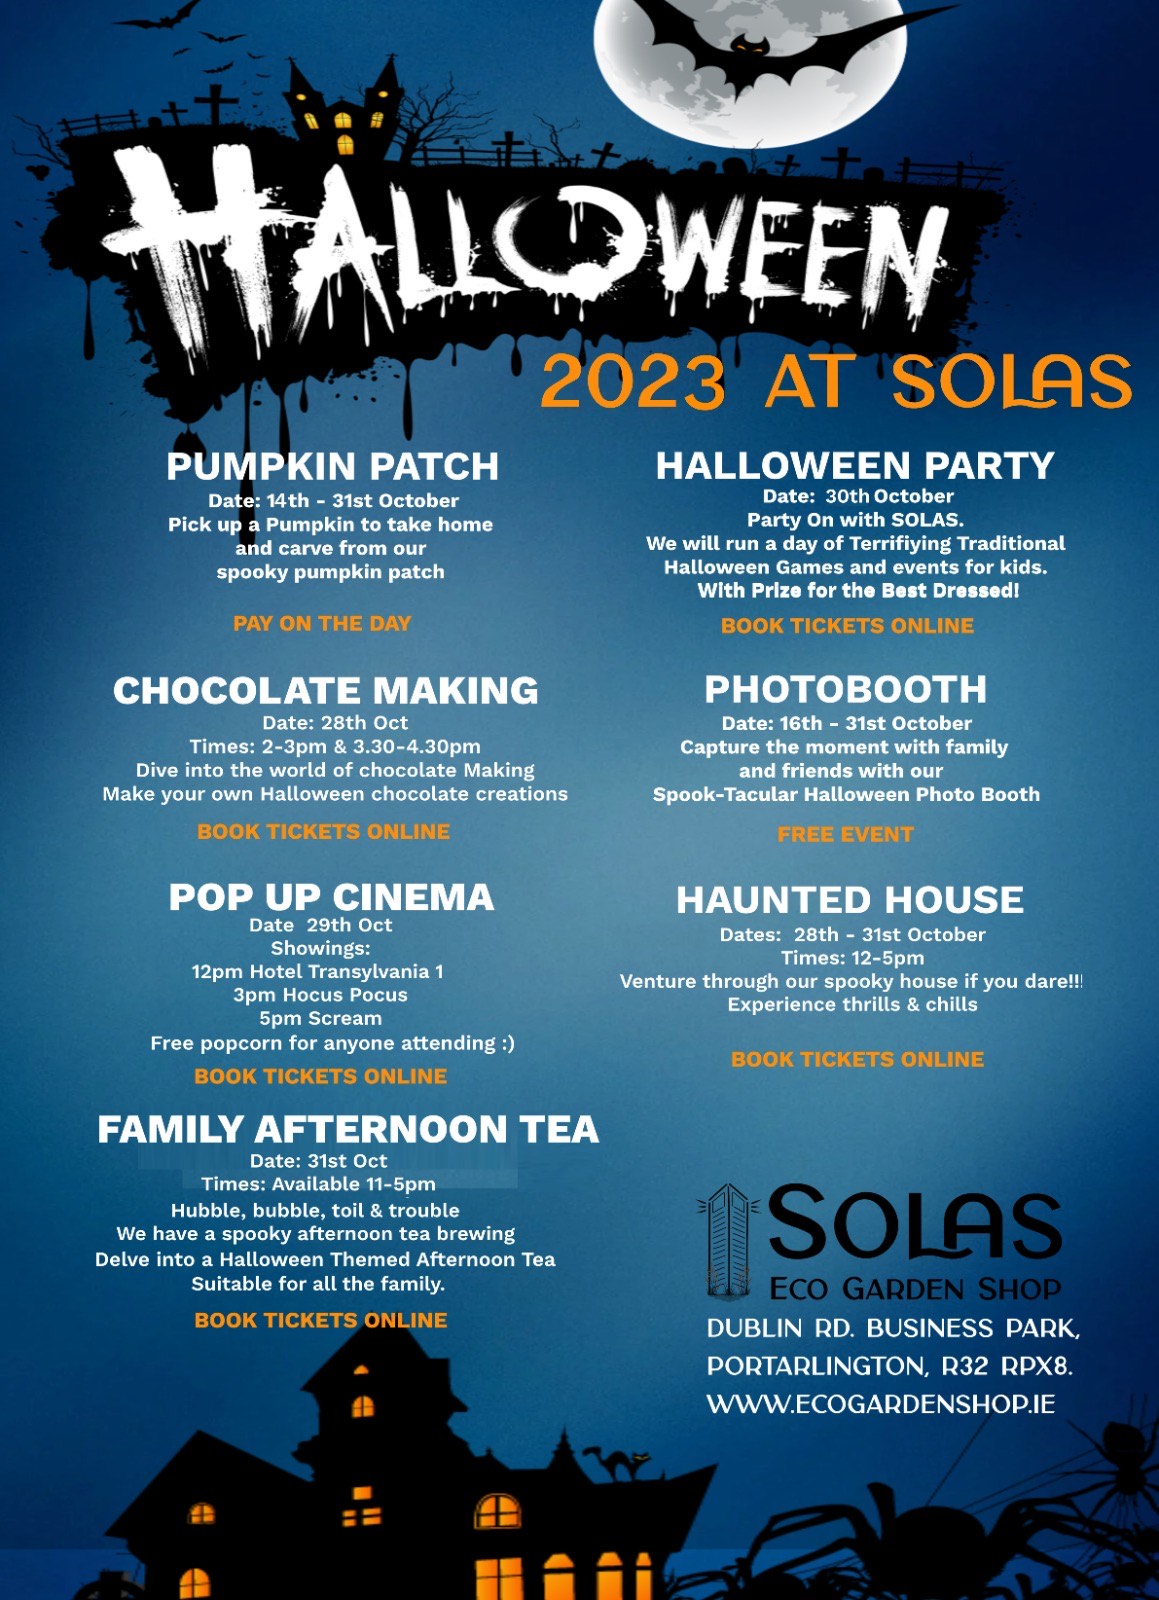 Halloween Events at Solas